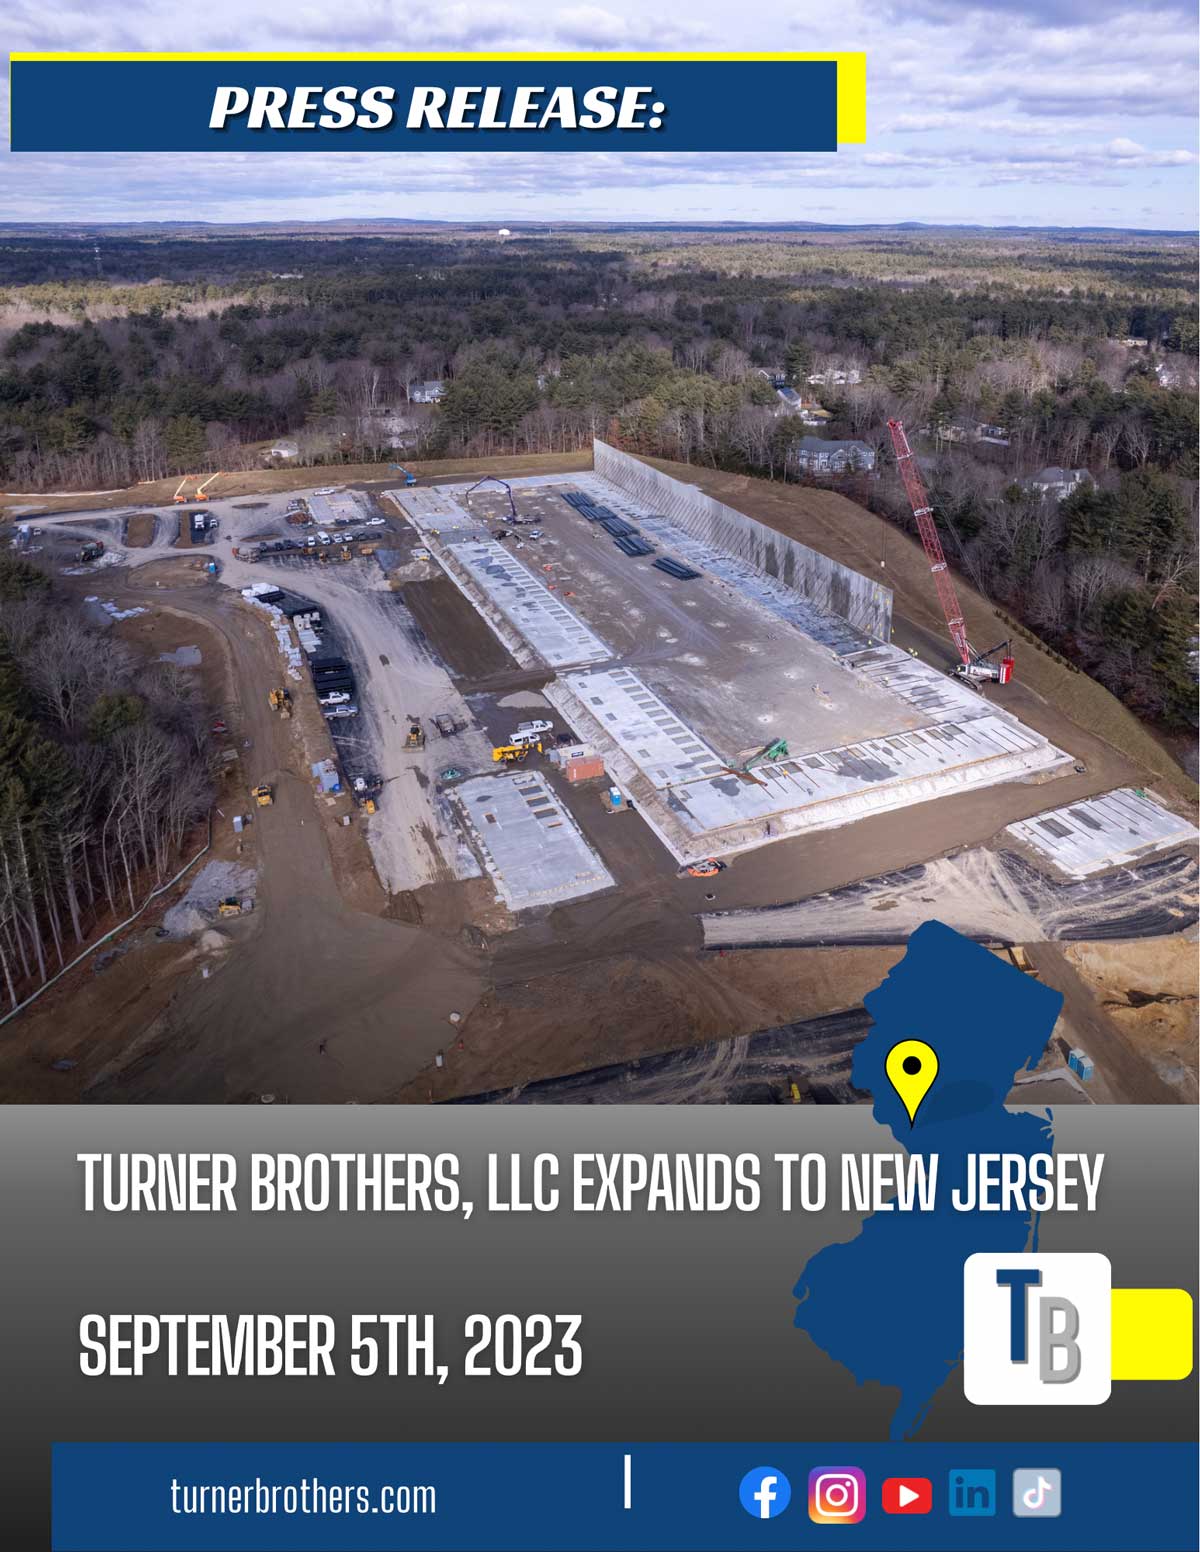 Turner Brothers, LLC Expands to New Jersey!